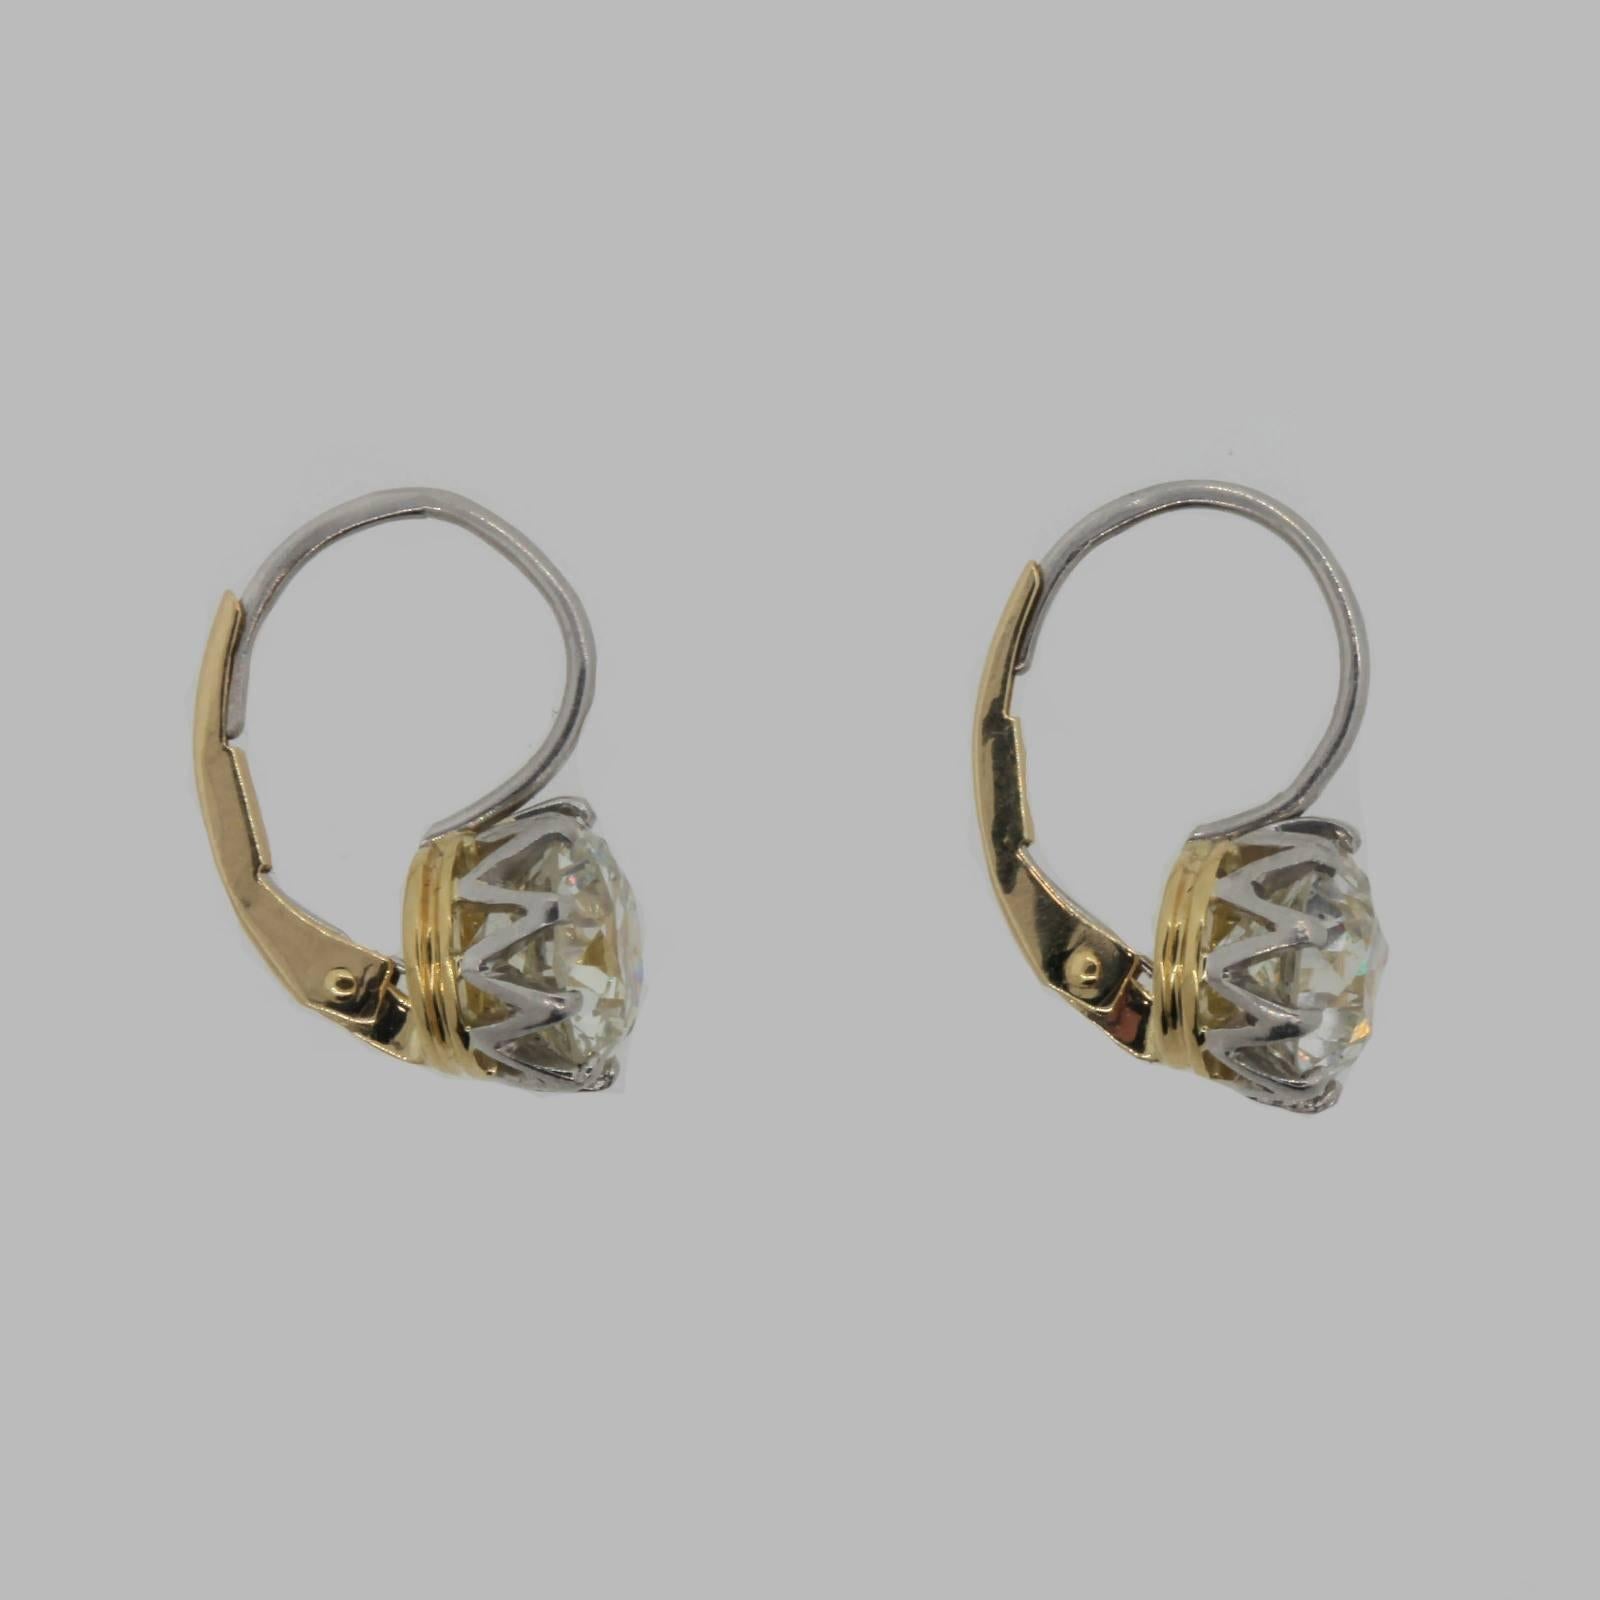 Brilliant Dangling Diamonds Studs!  This handmade earrings are fabricated in platinum and 18KT yellow gold, Victorian style crown setting.  Each earring is set with certified Old European Cut Diamonds.  One weighs 1.44 carat of J color - SI2 clarity